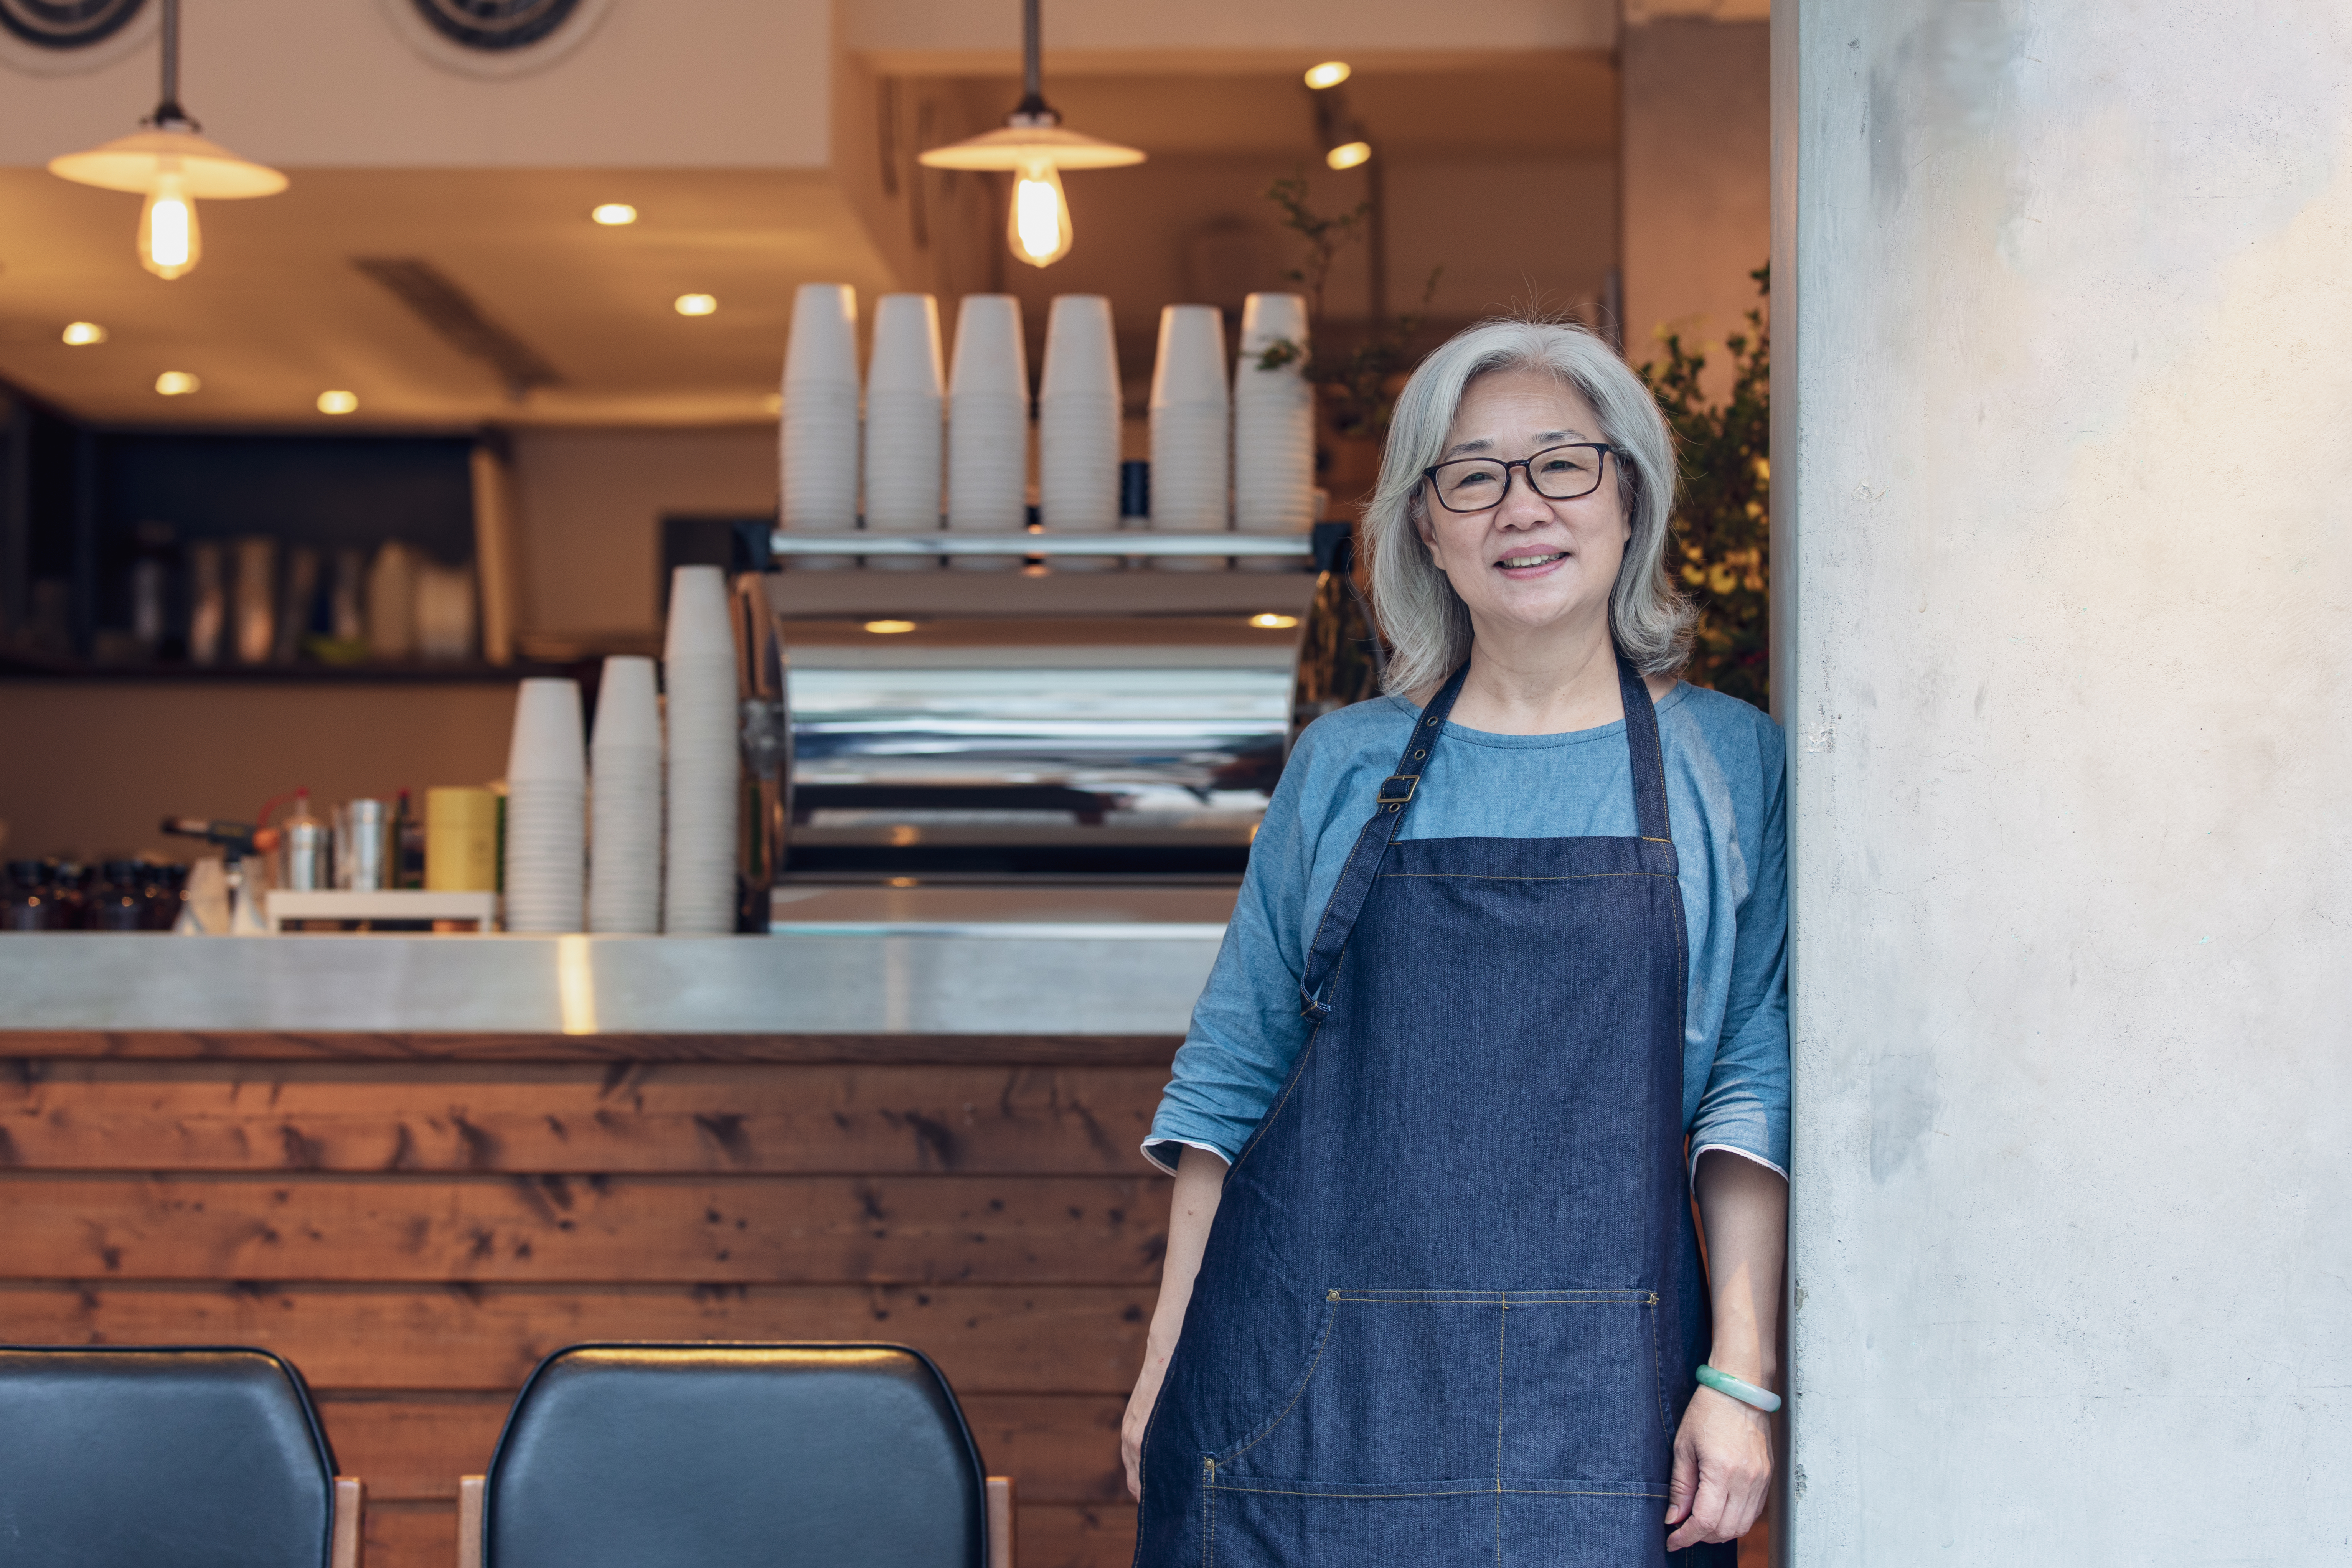 A gray-haired woman standing inside a coffee shop | Source: Getty Images